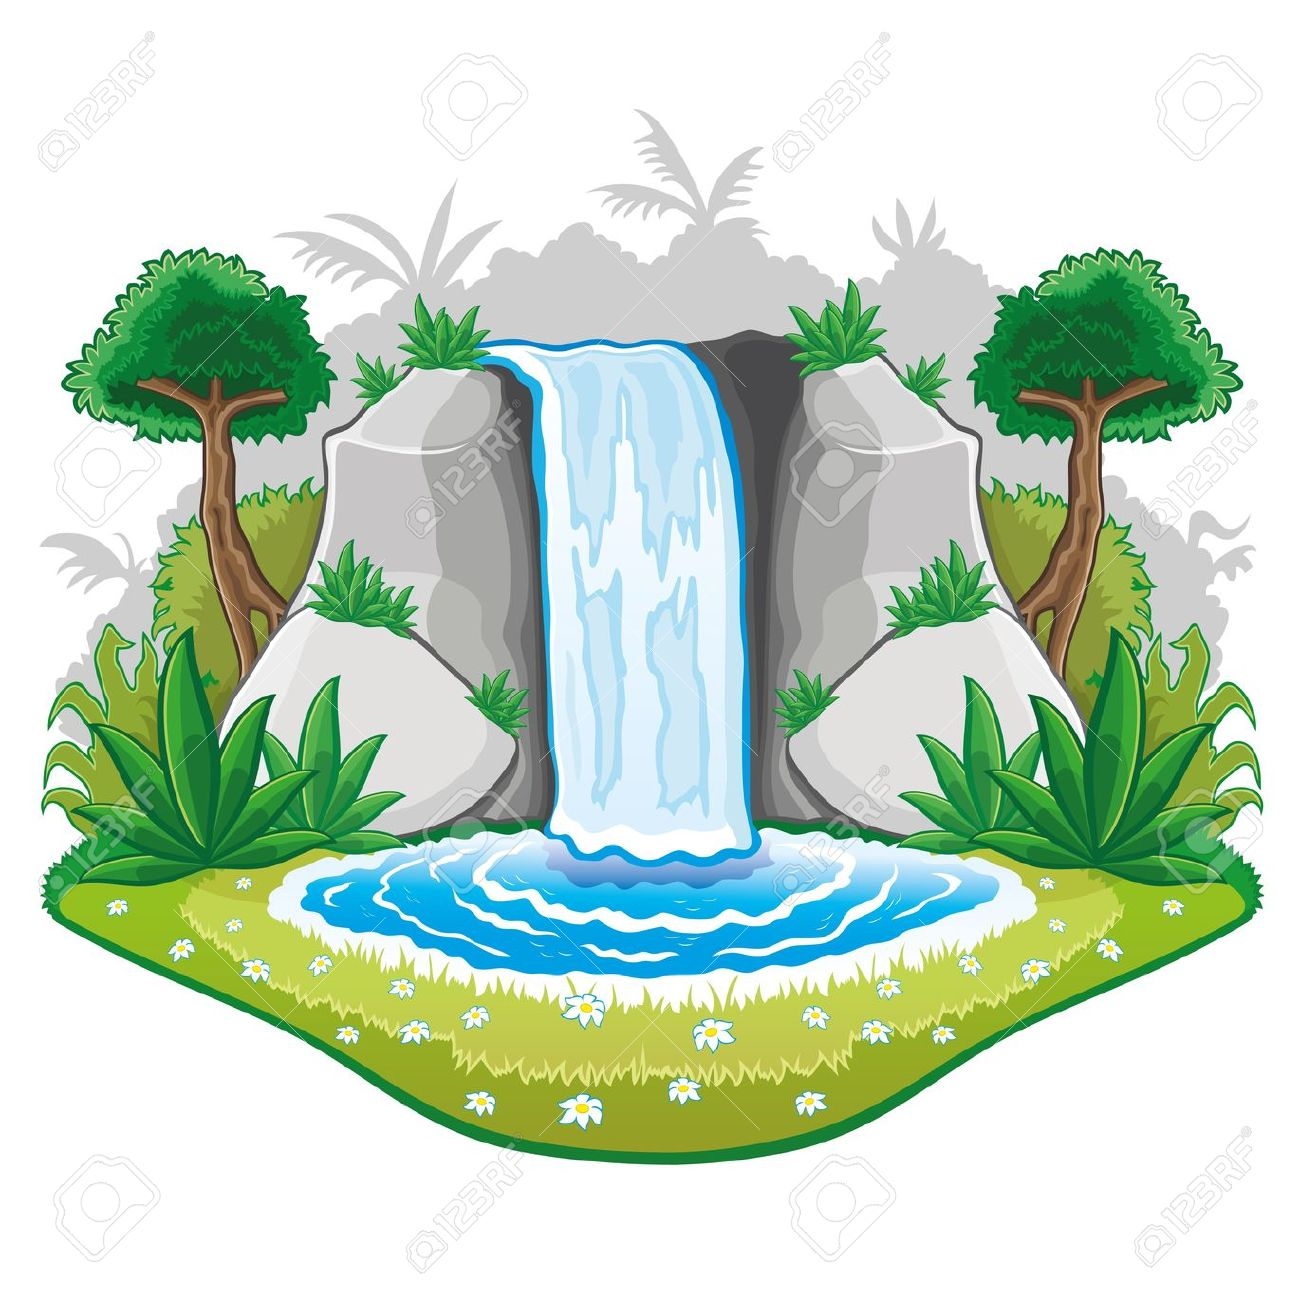 waterfall: Image with .